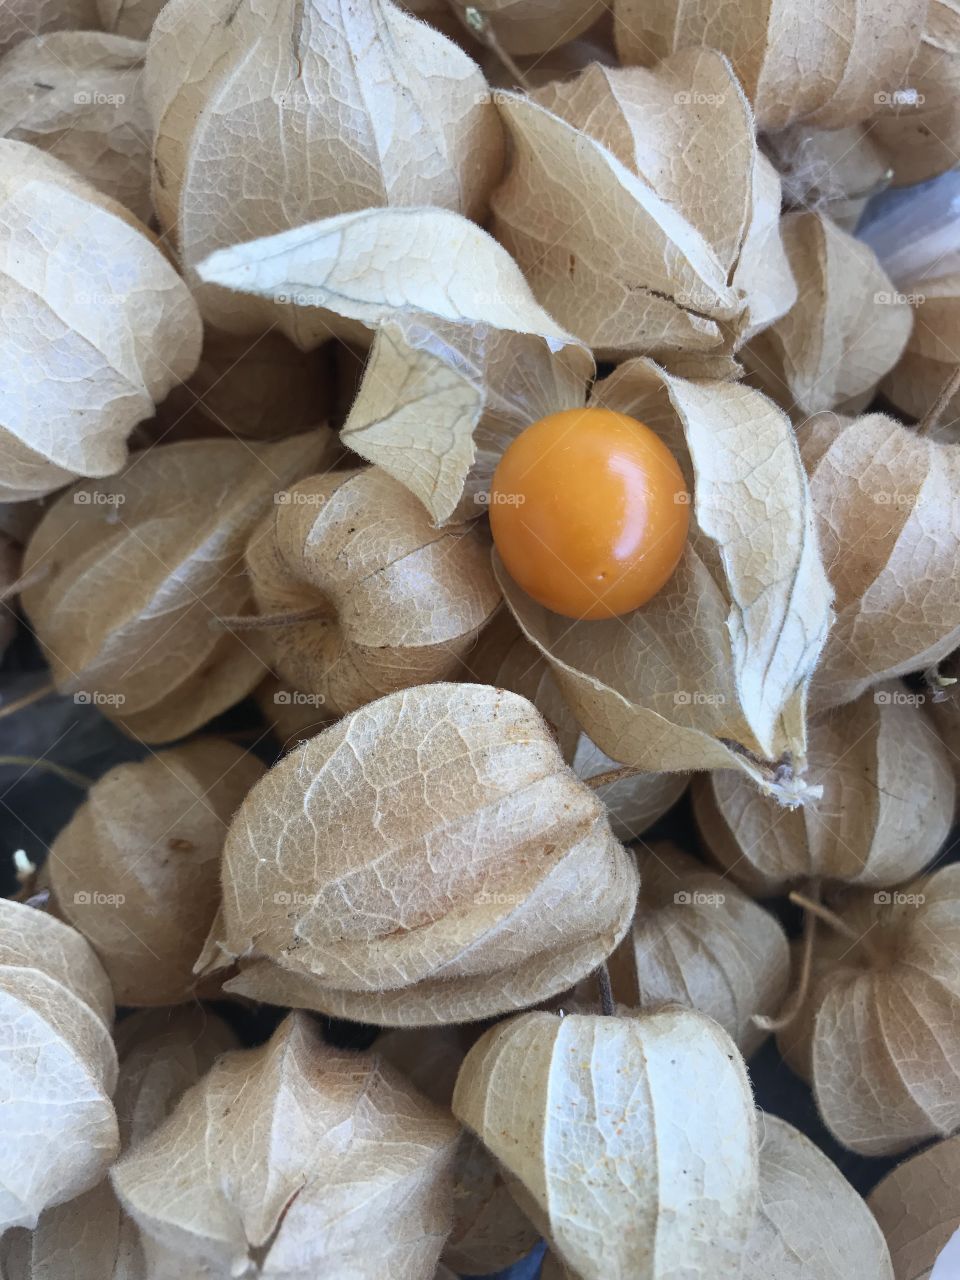 Cape gooseberry / Peruvian ground cherry - Physalis pruinosa. ... bushy and carries orange-yellow, cherry- sized fruits that are wrapped in light-brown lampions